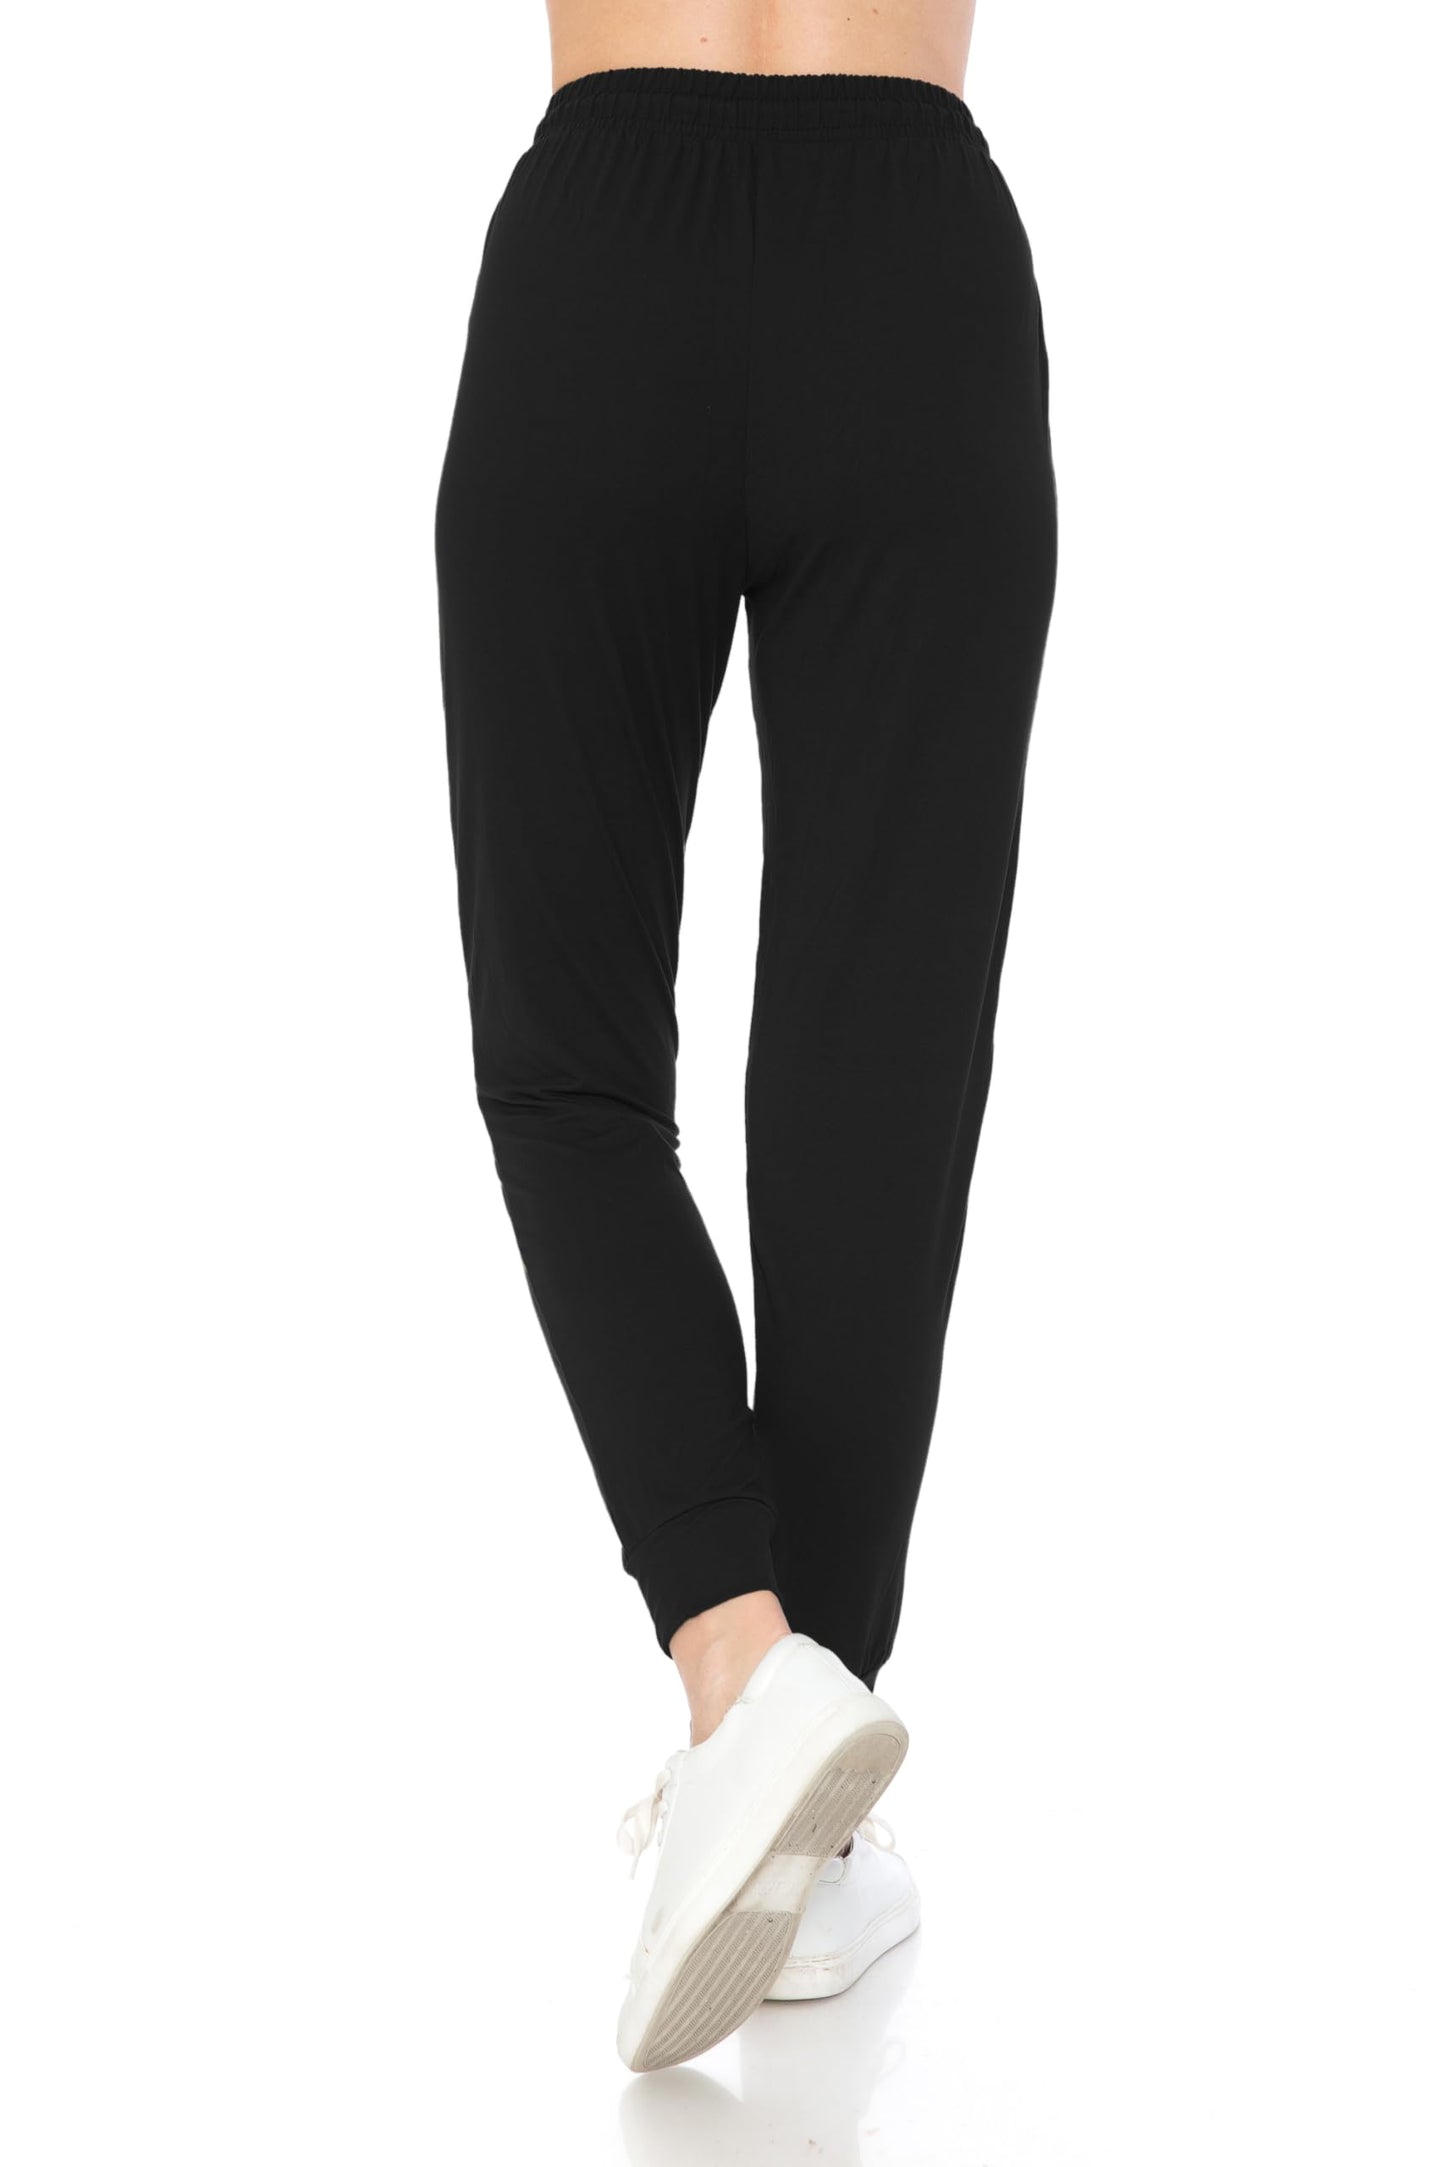 Leggings Depot Womens Relaxed fit Jogger Pants - Track Cuff Sweatpants with Pockets, Black, Small